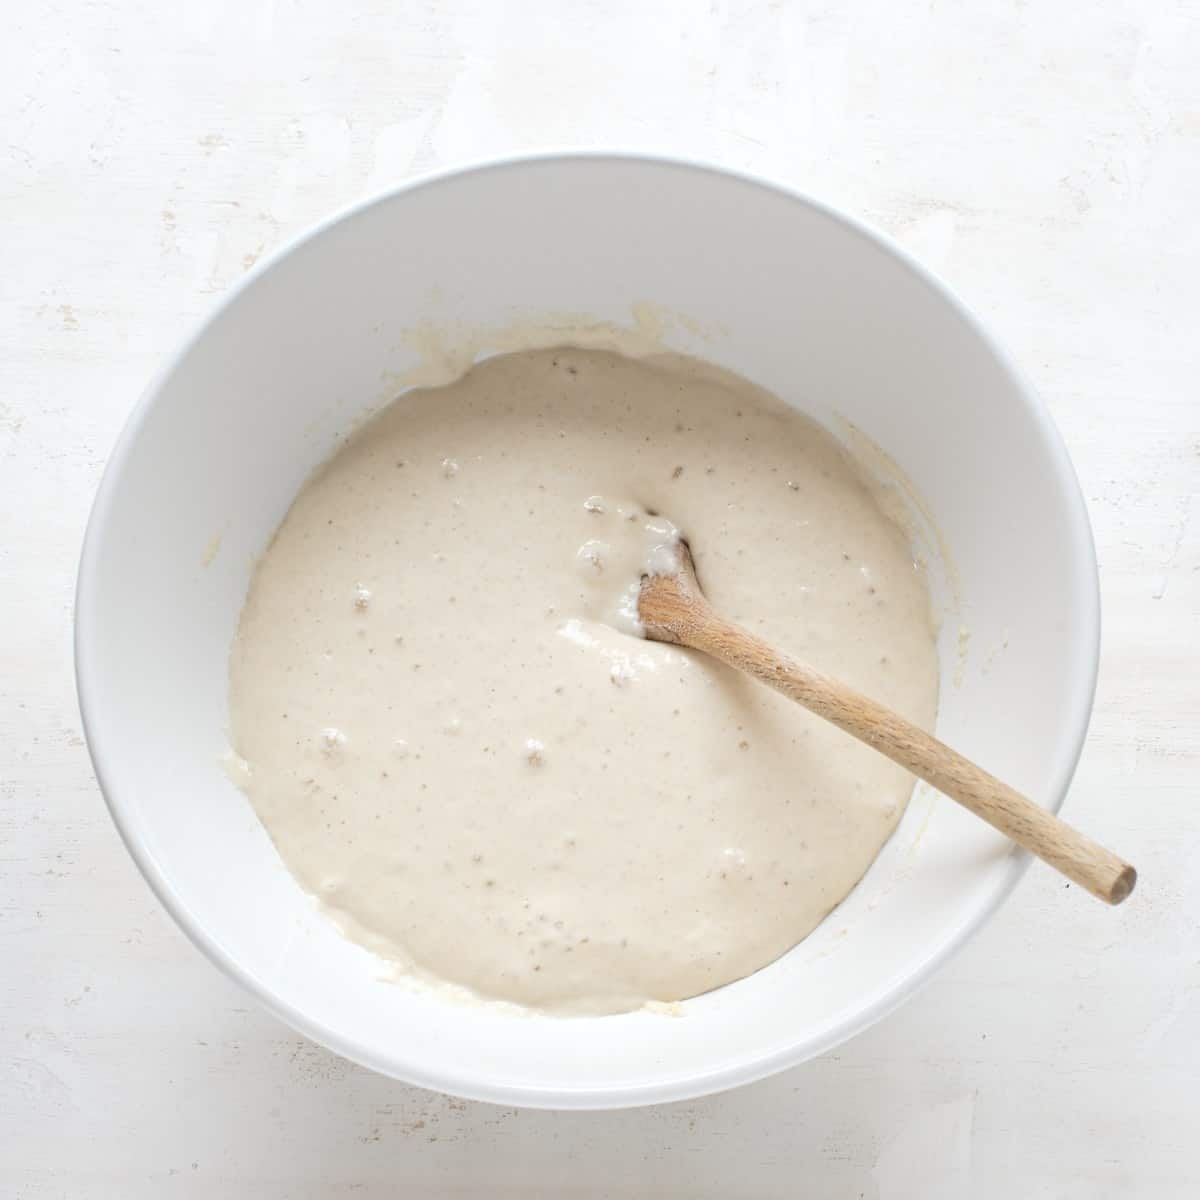 Yeast dough rising in a white bowl with a wooden spoon.